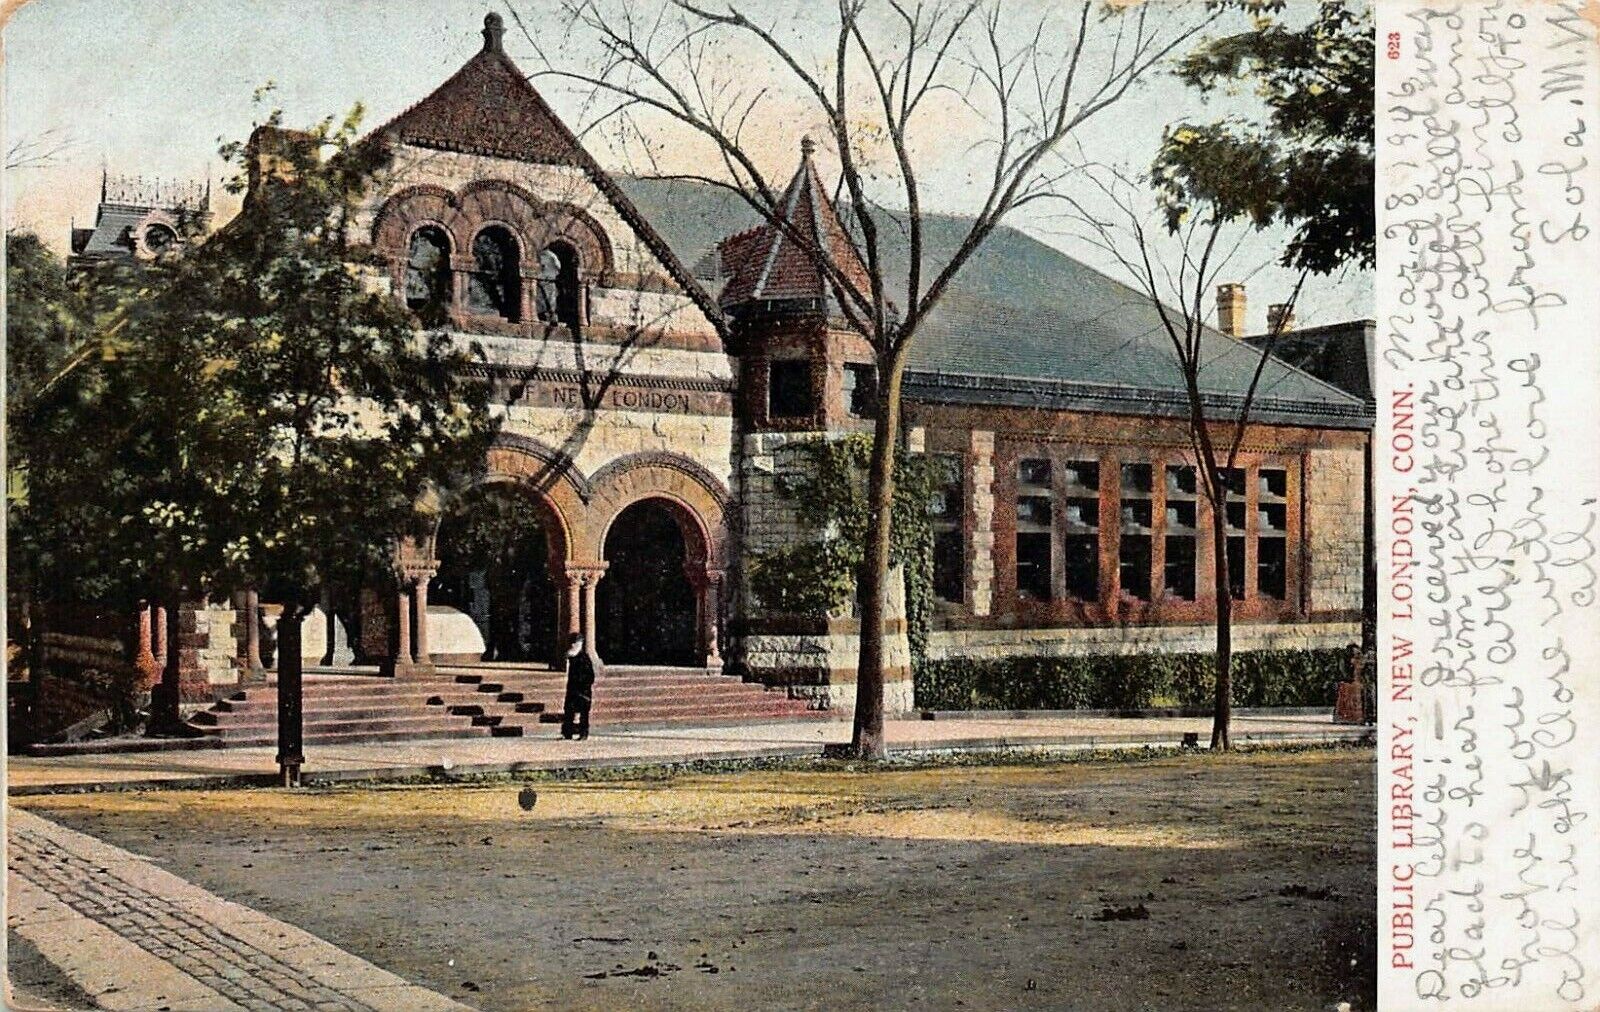 Public Library, New London, Connecticut, Very Early Postcard, Used in 1906